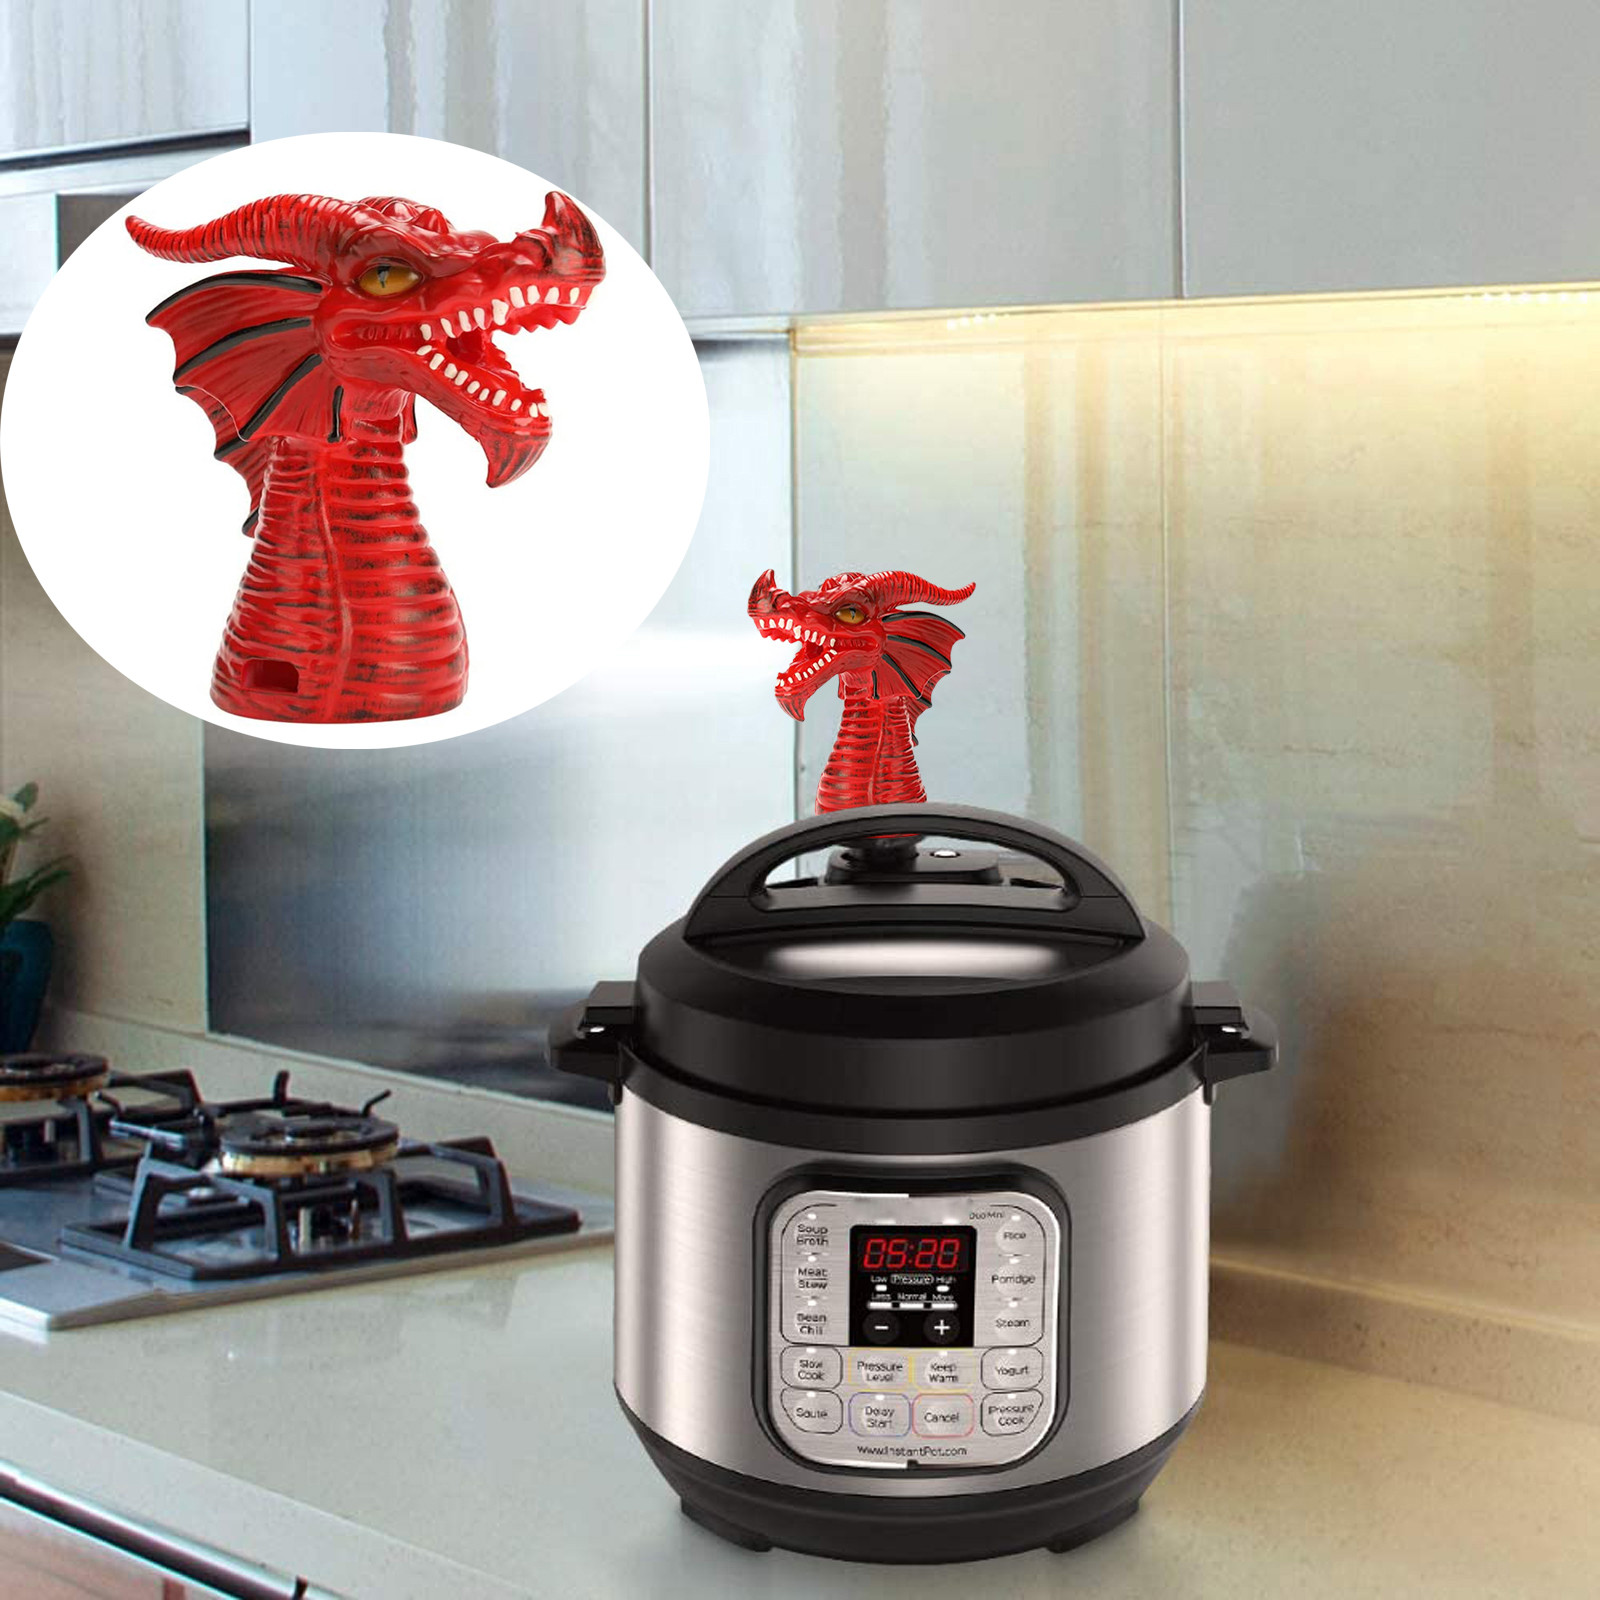 Fire Breathing Dragon Steam Release Accessory Steam Diverter For Pressure Cooker Kitchen Supplies Cookware Parts Tools #T3G